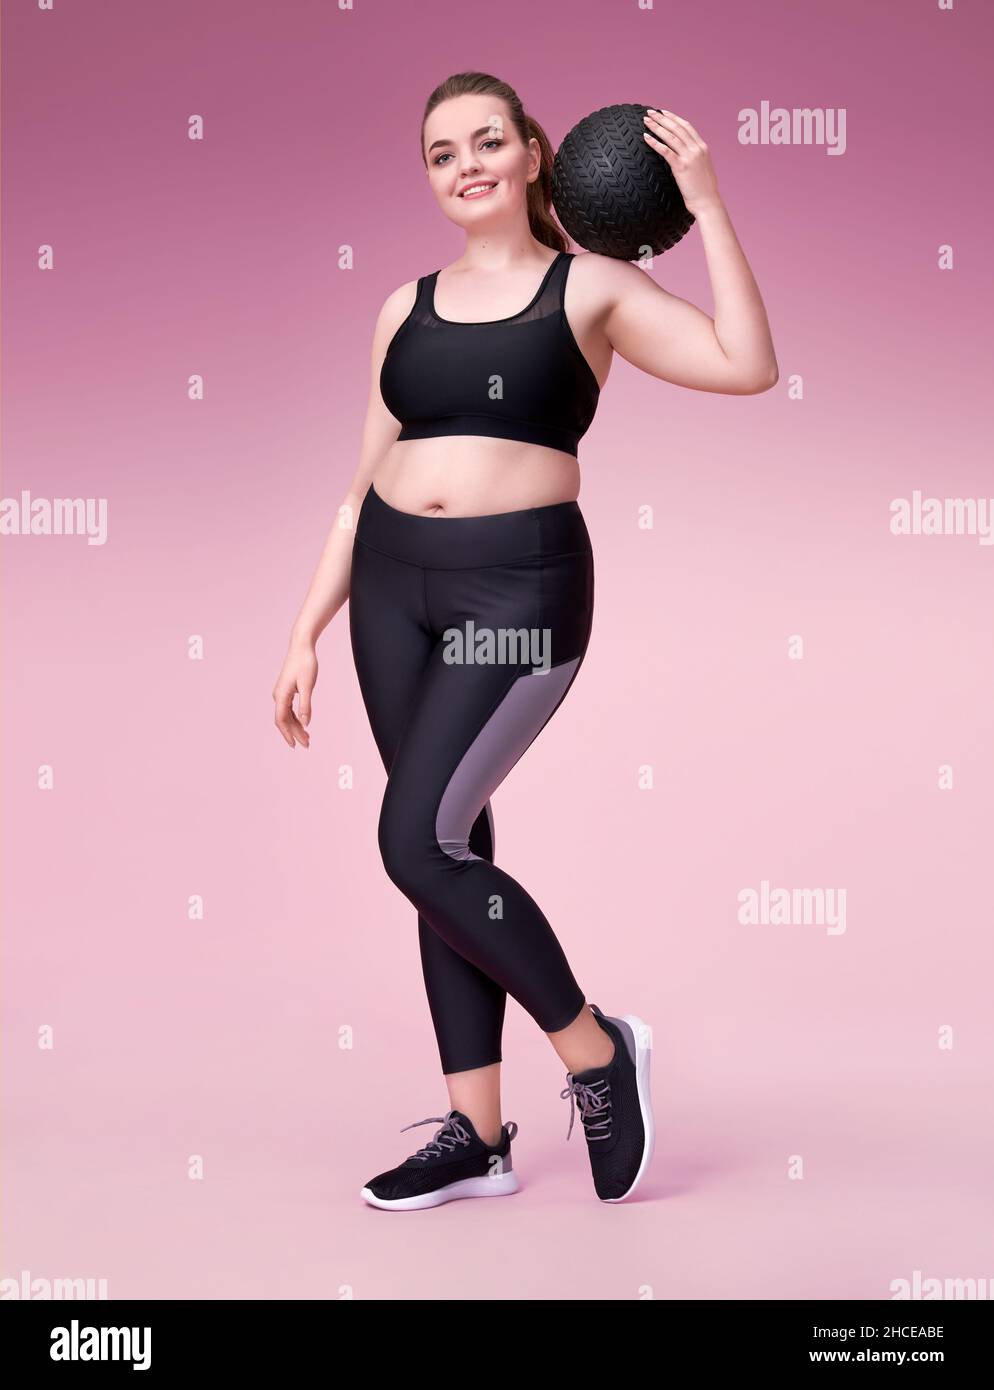 Sporty woman with medicine ball on her shoulder. Photo of model with curvy figure in fashionable sportswear on pink background. Sports motivation and Stock Photo